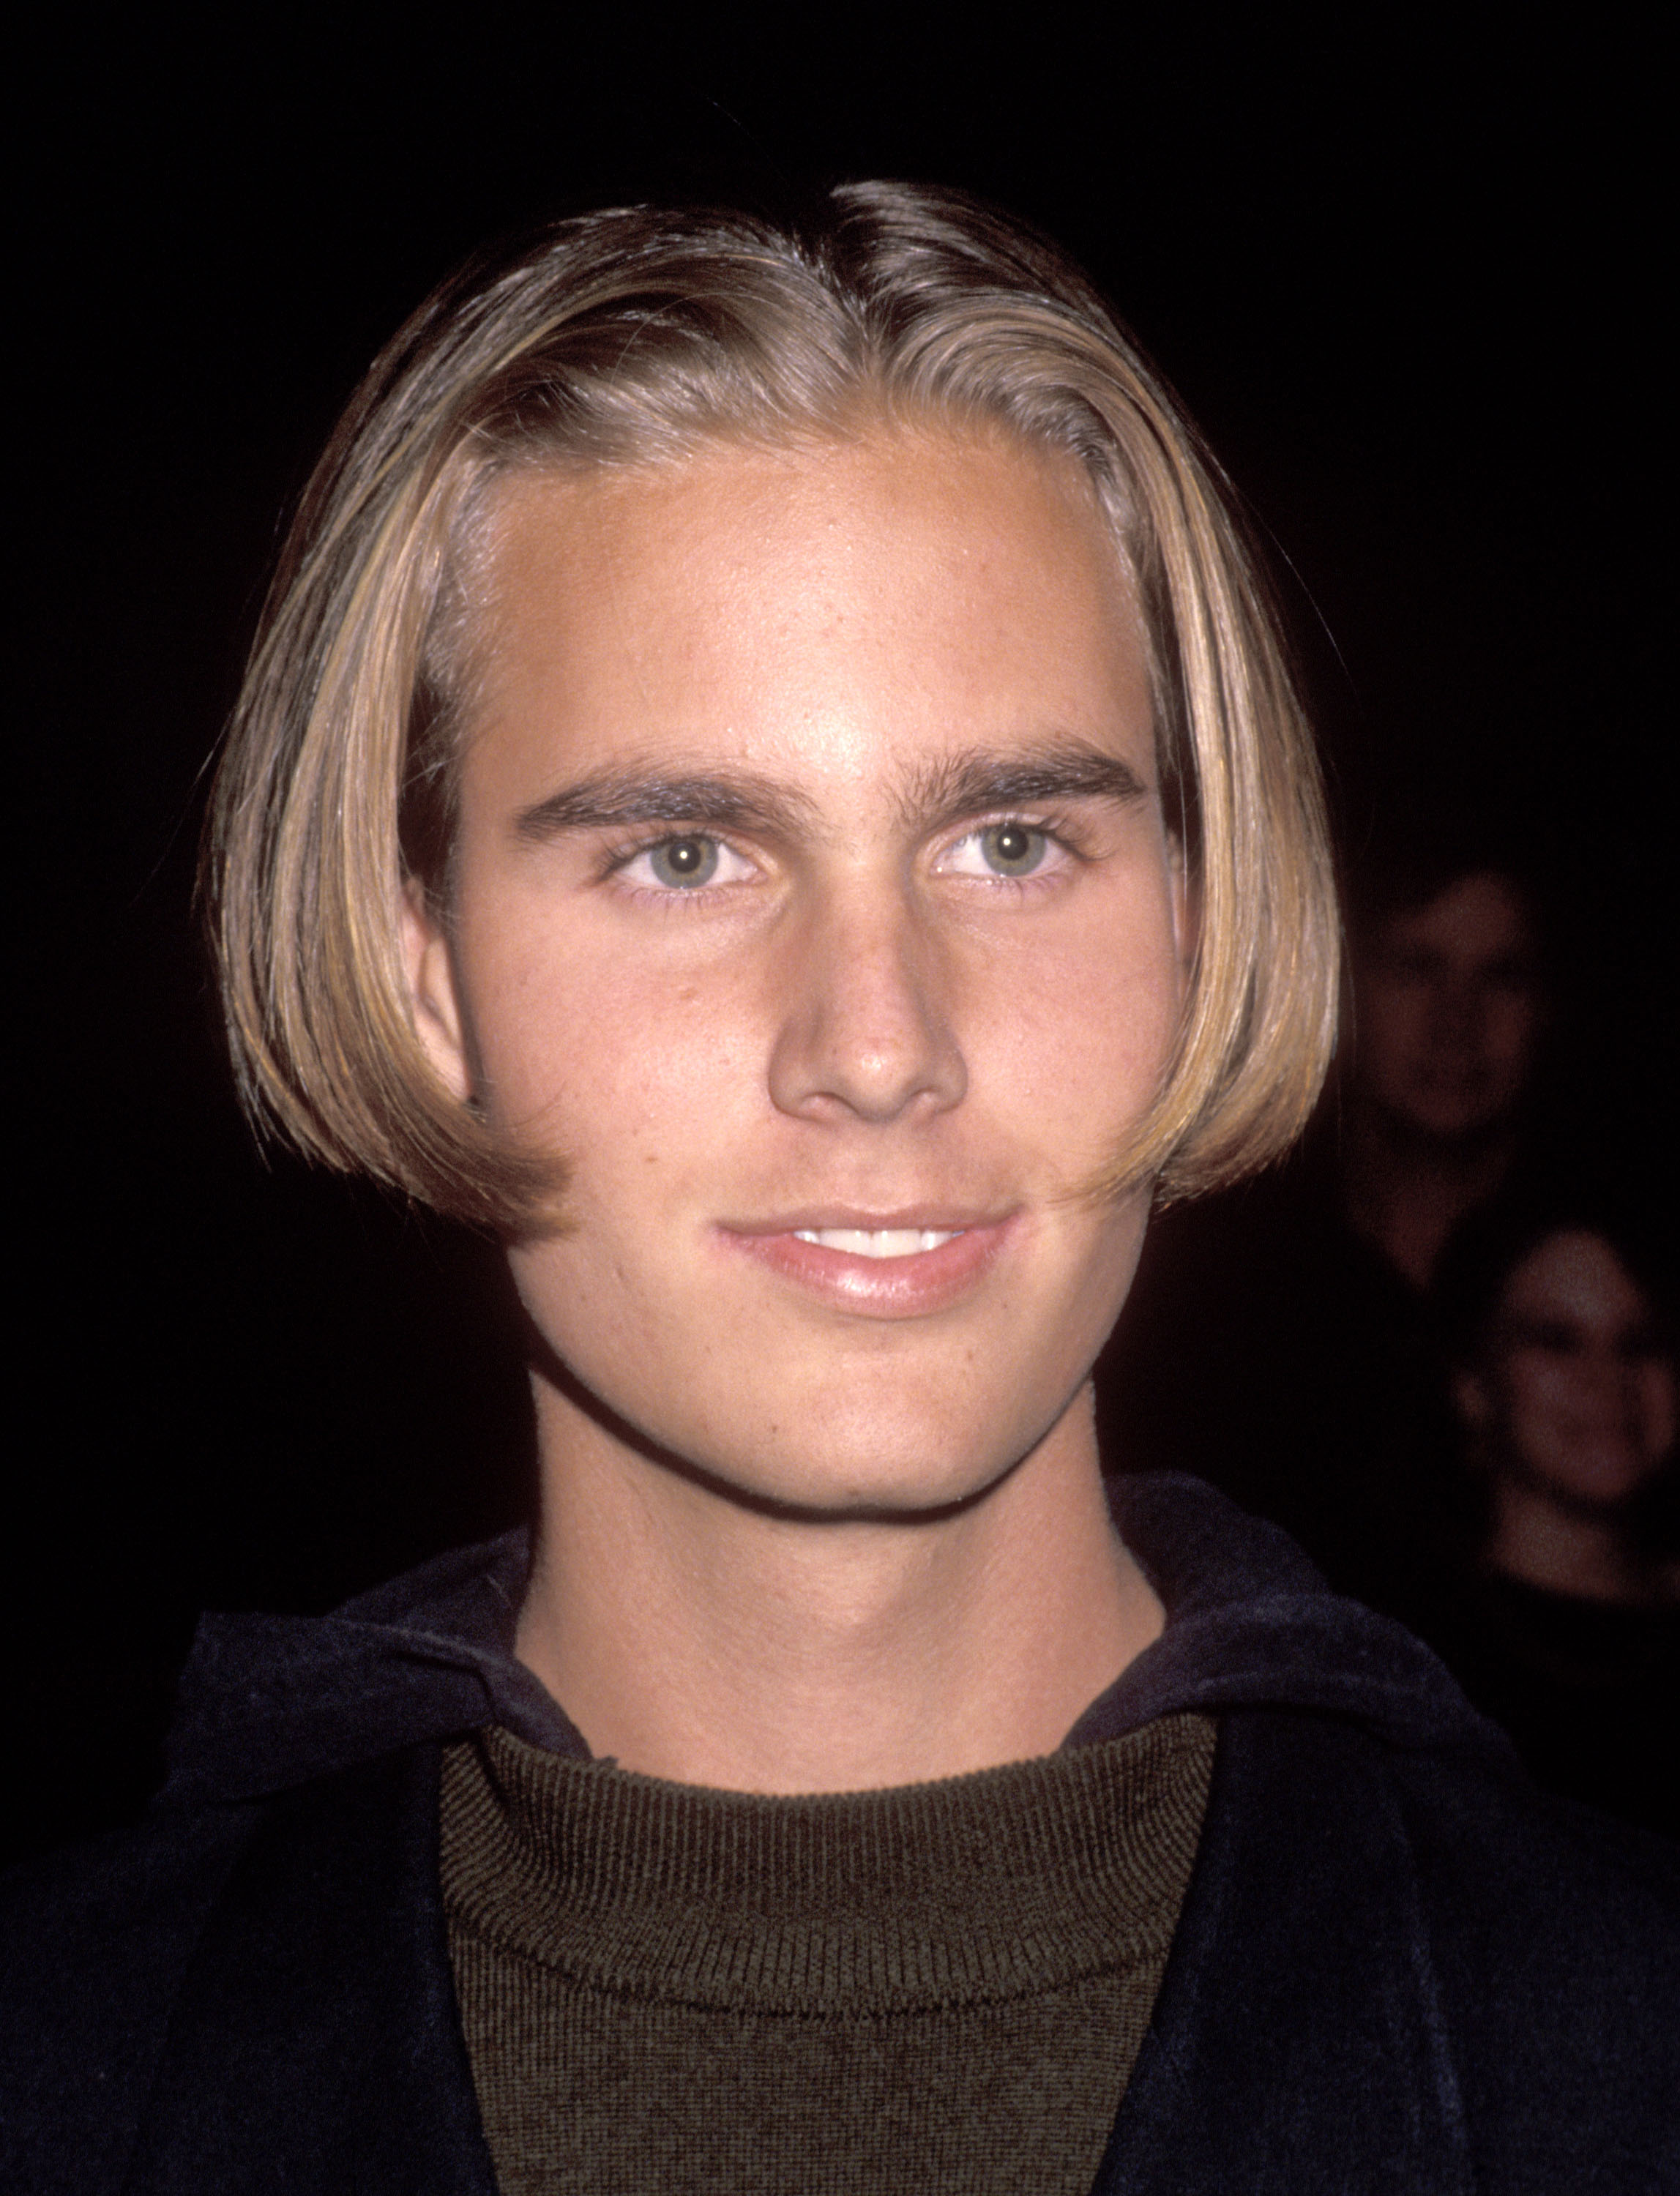 Christopher Landon attend the 13th Annual Youth in Film Awards at the Television Academy of Arts and Sciences on December 1, 1991 in North Hollywood, California. | Source: Getty Images